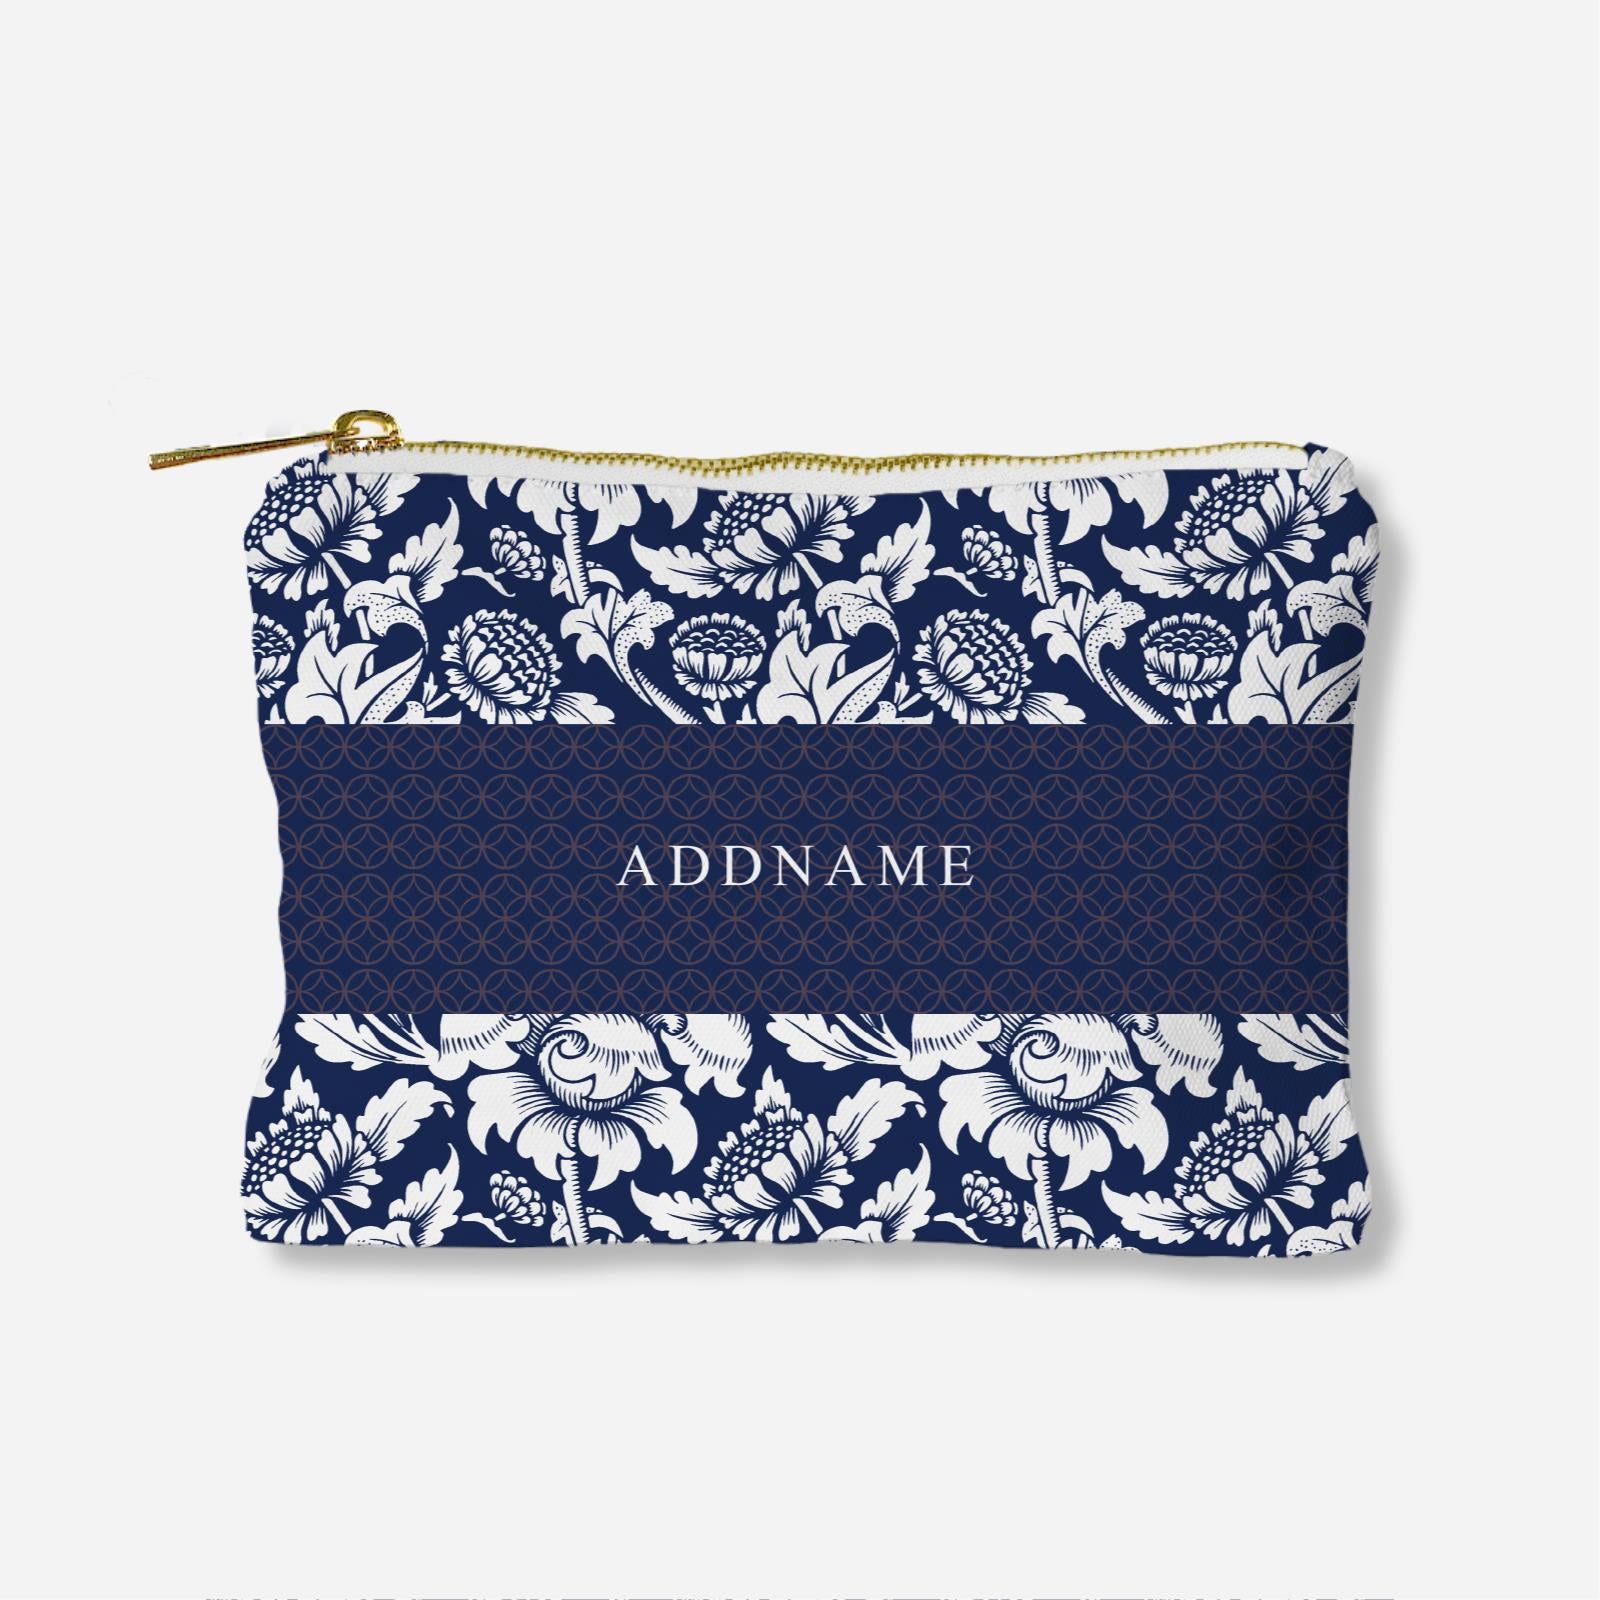 Limitless Opportunity Series - Blue Full Print Zipper Pouch With English Personalization